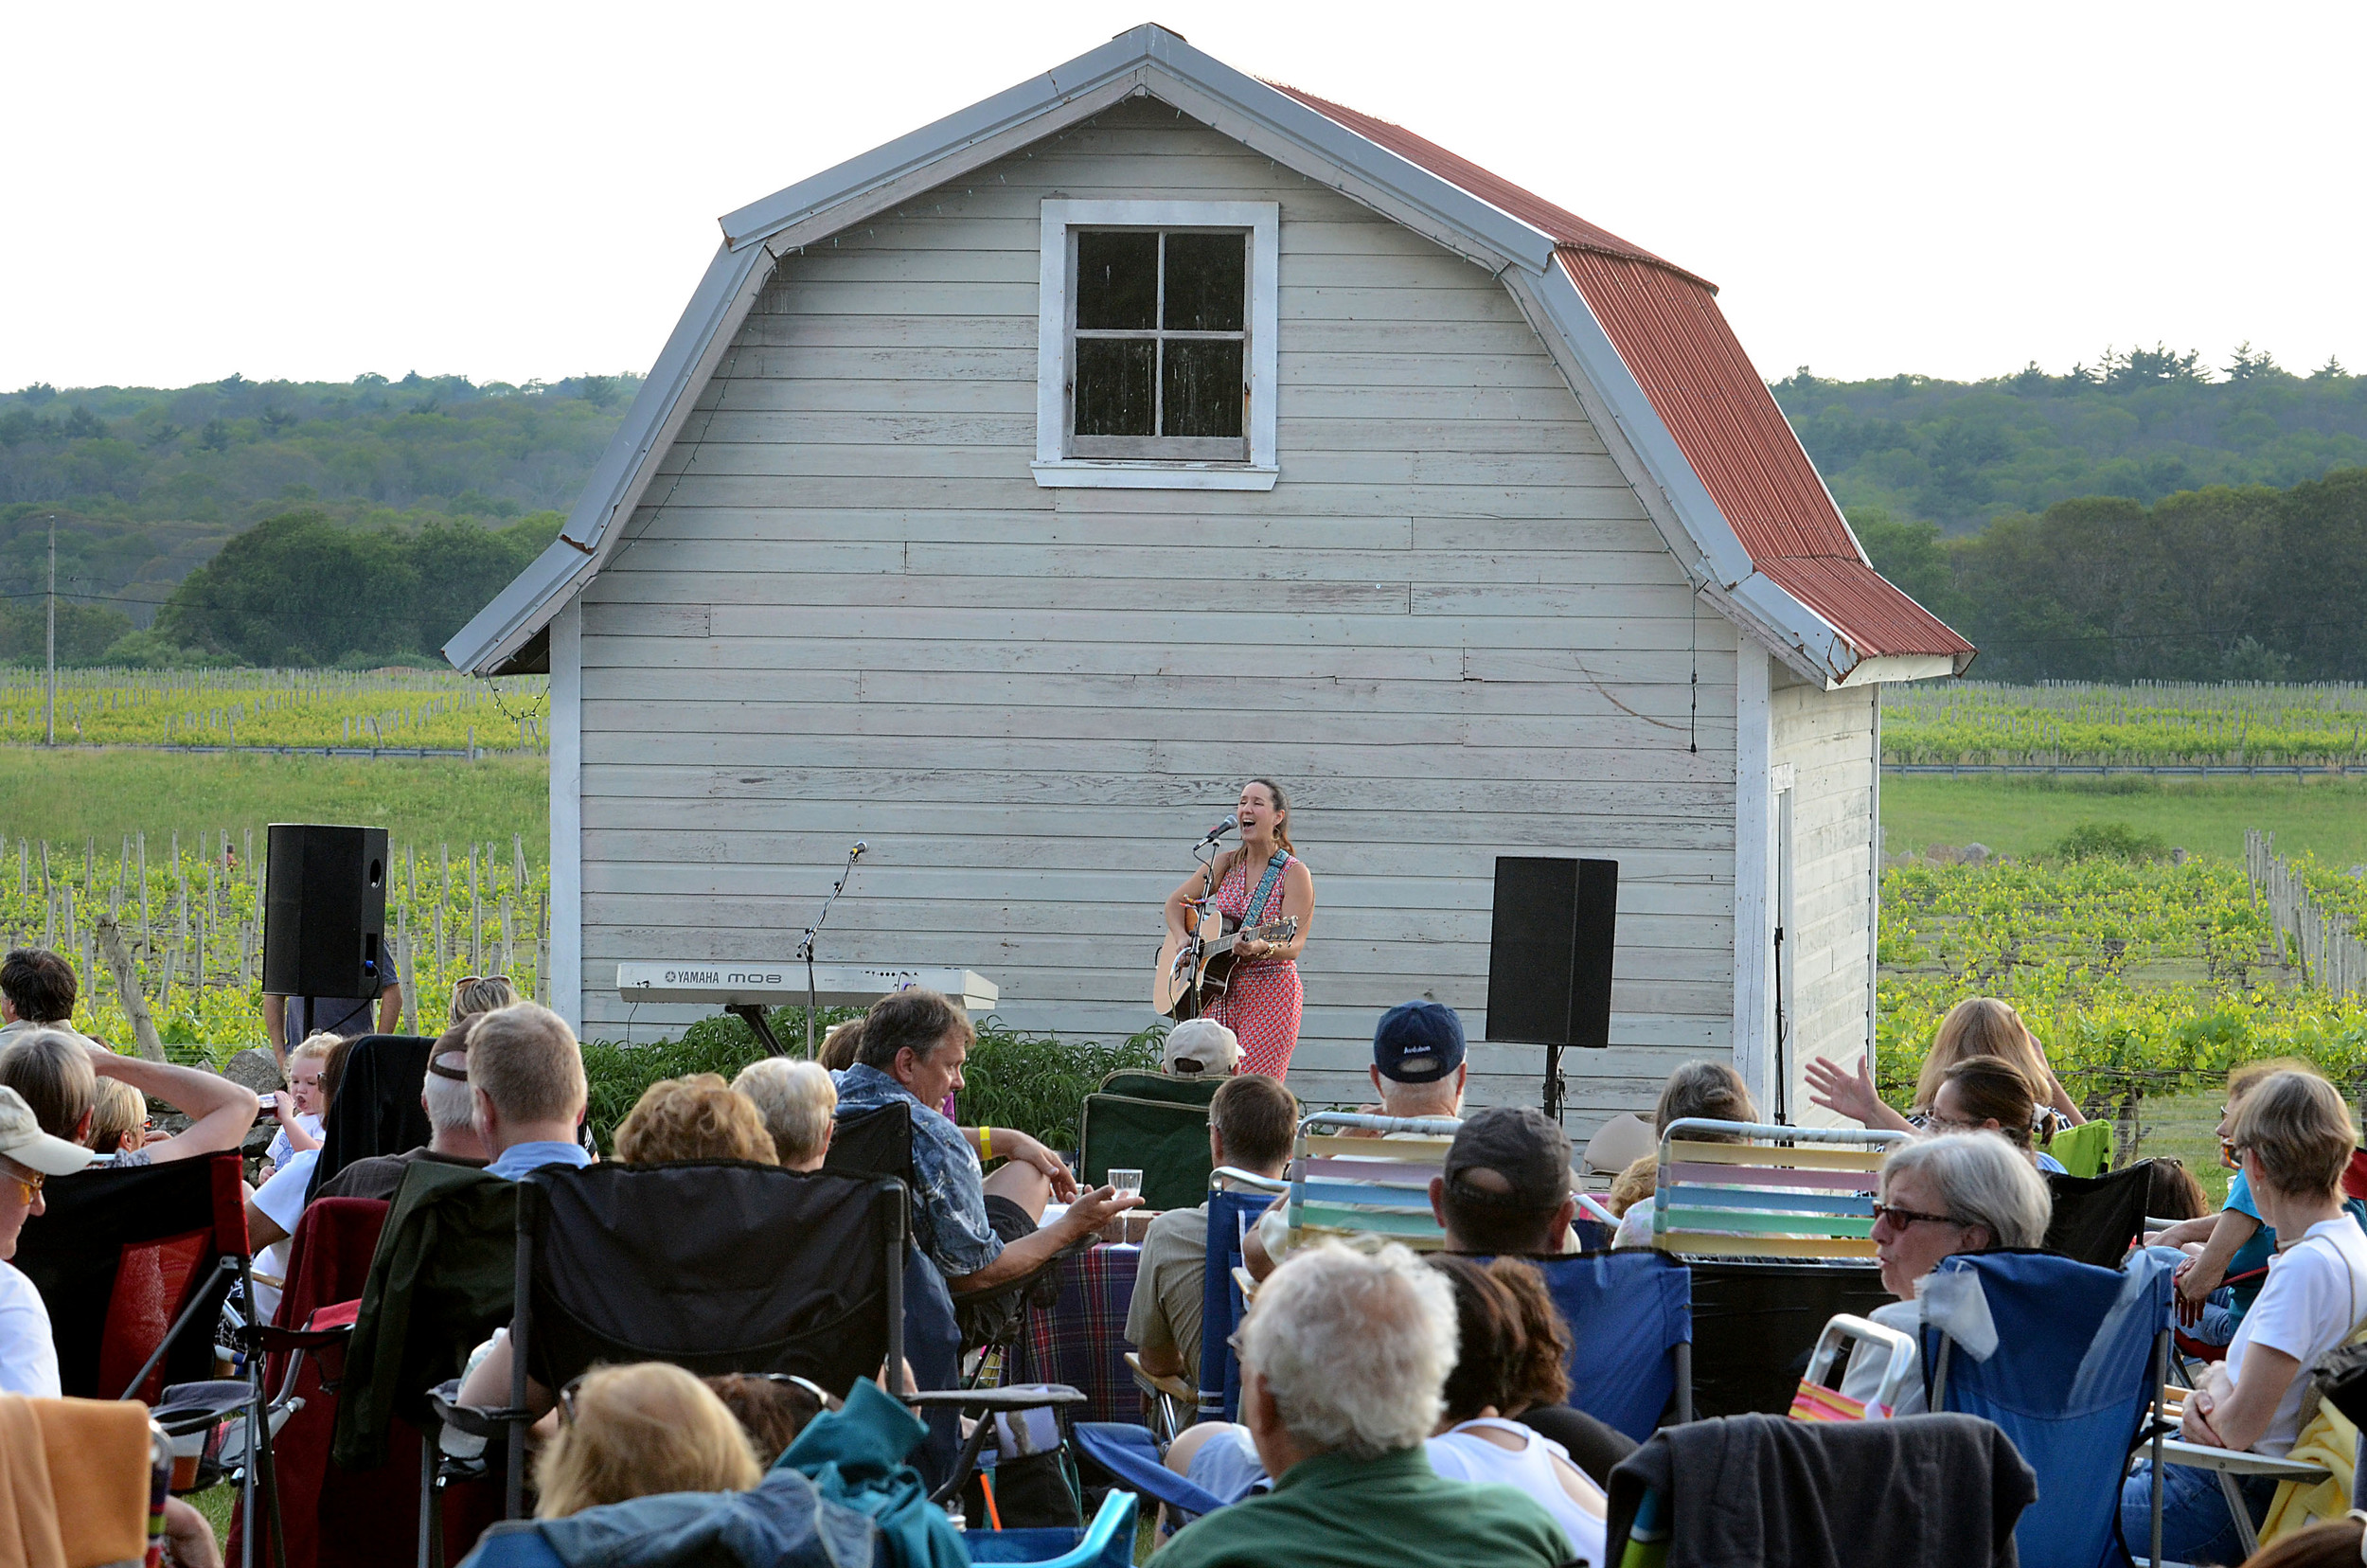 A performer entertains at sunset at Westport Rivers Vineyard and Winery.